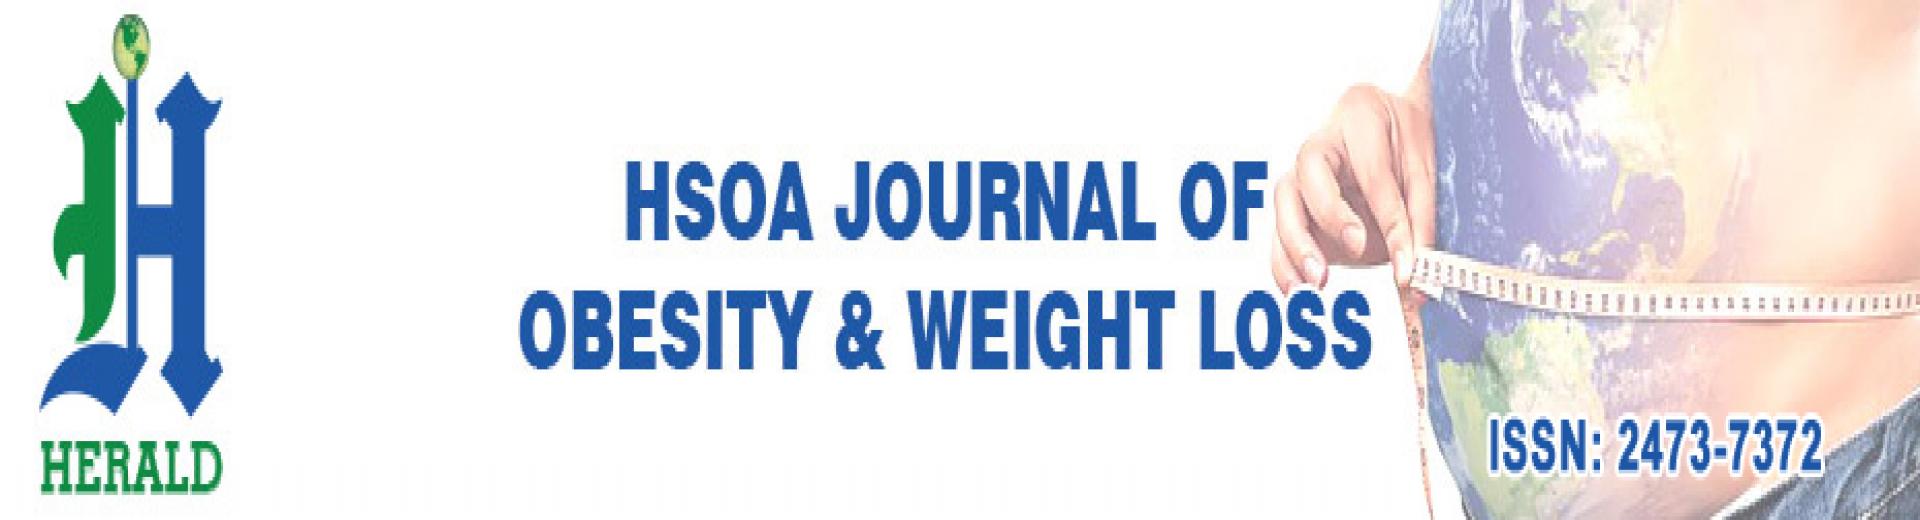 Journal of Obesity & Weight Loss